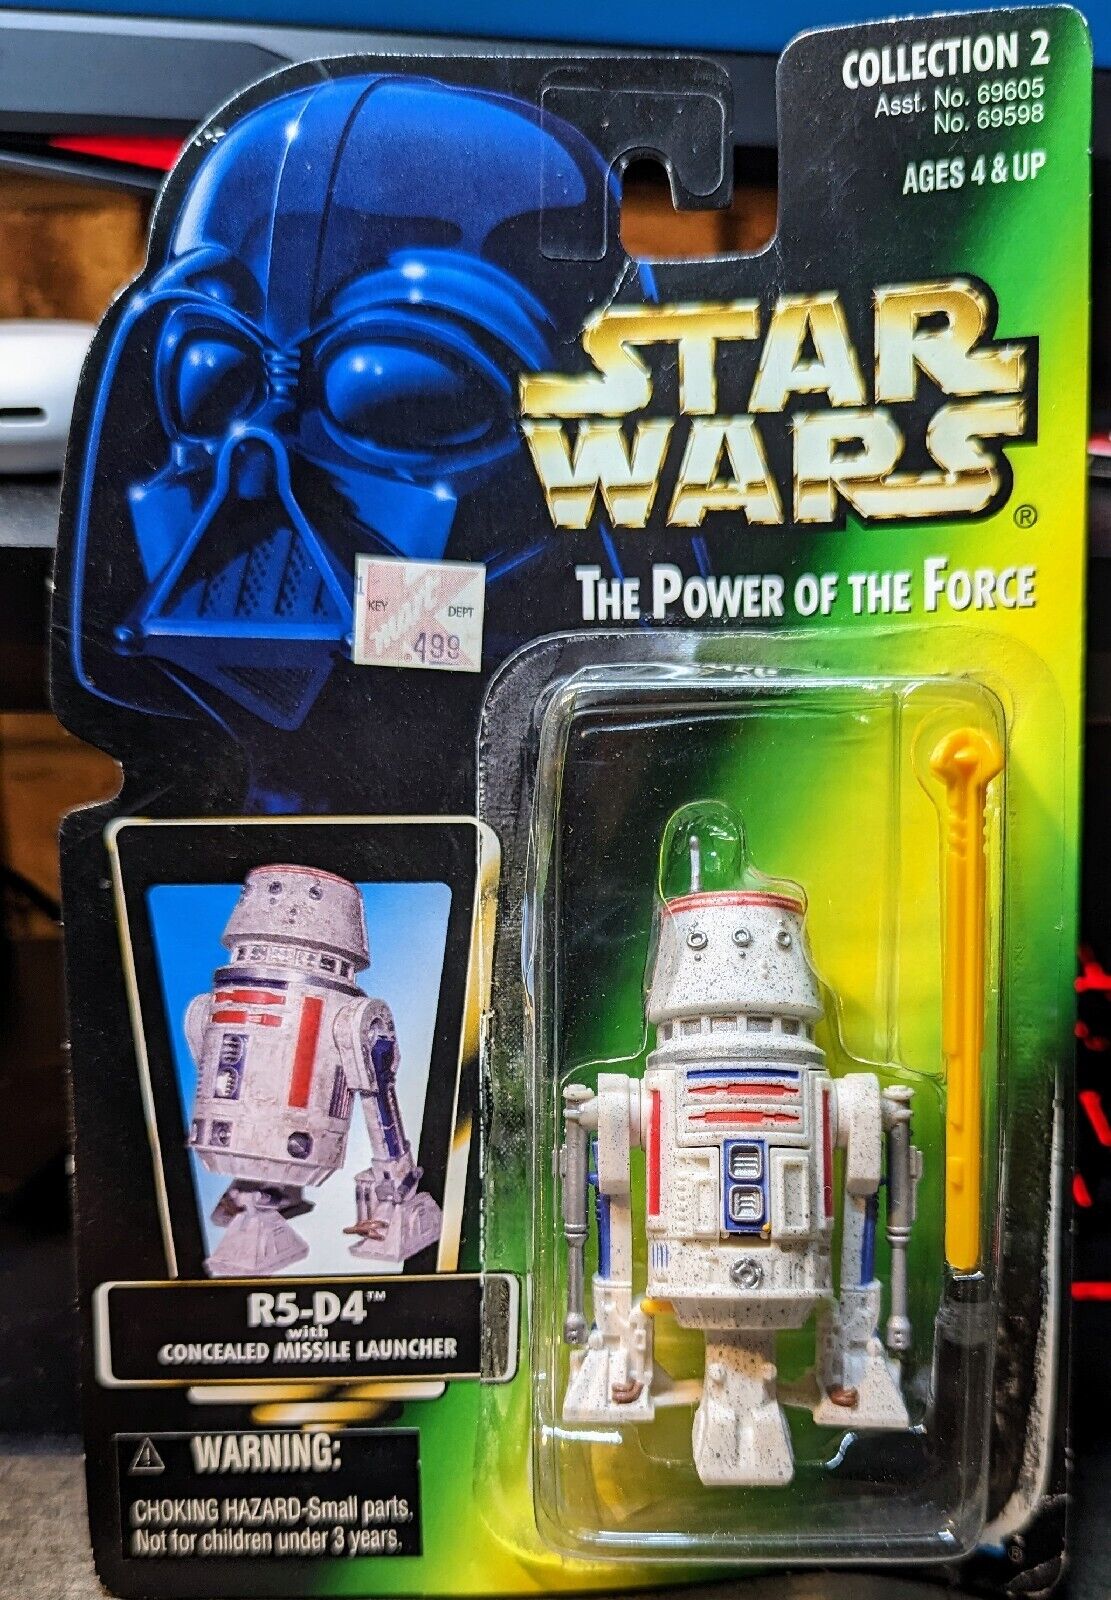 Star Wars R5-D4 Power of the force POTF